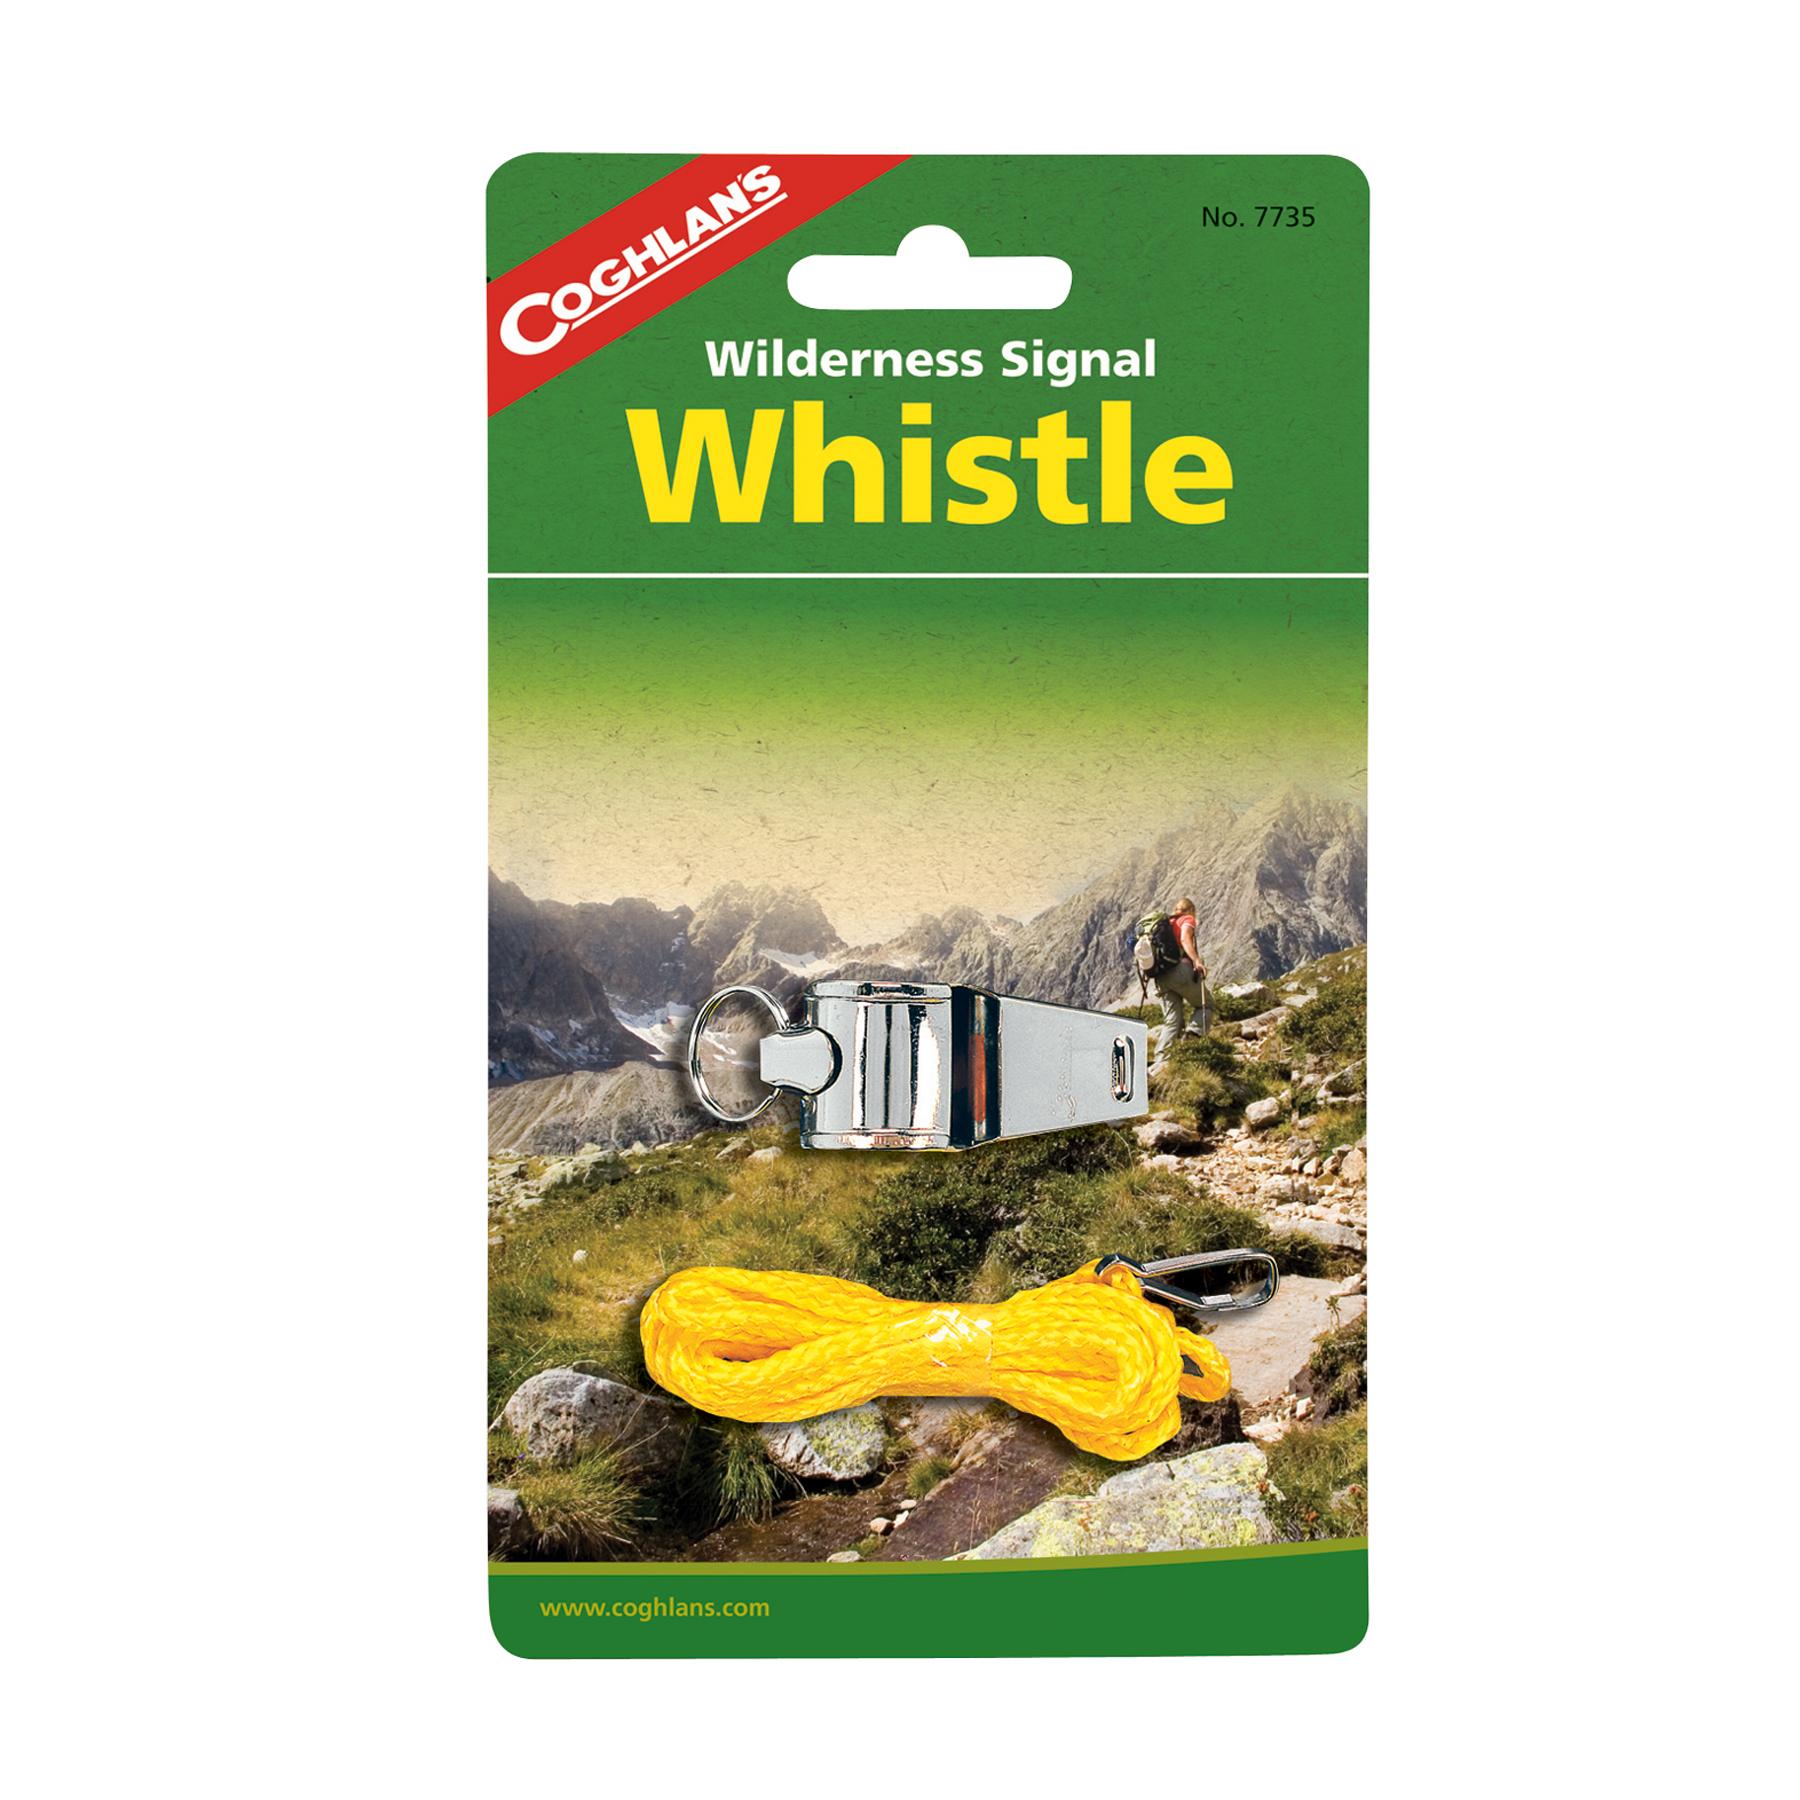  Wilderness Signal Whistle